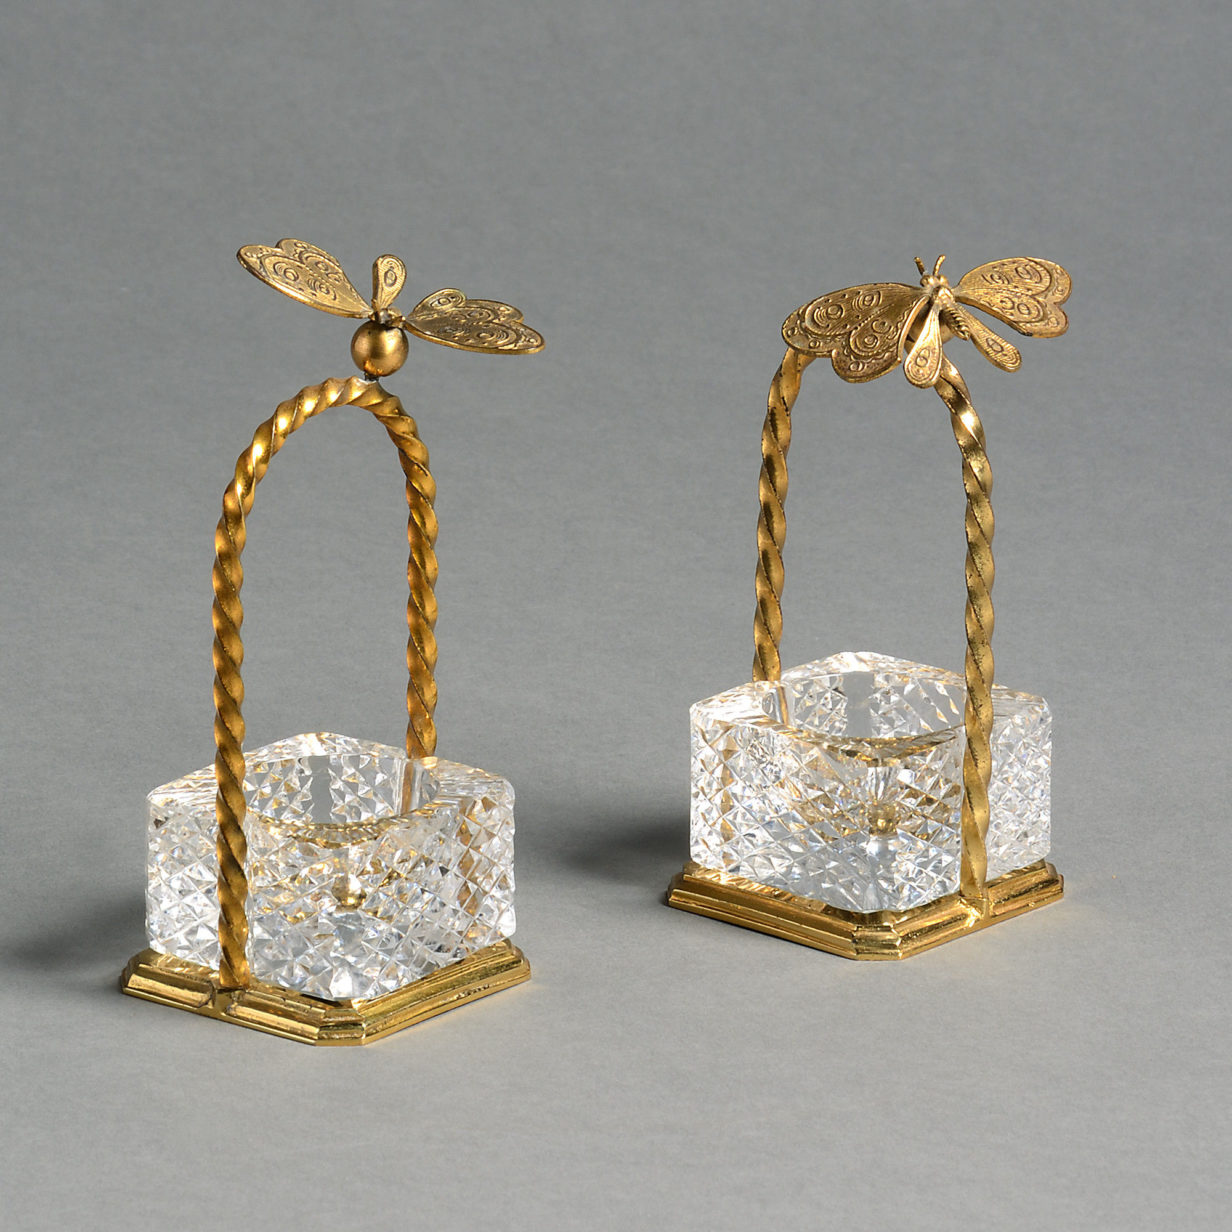 A pair of mid-20th century ormolu and cut glass salts